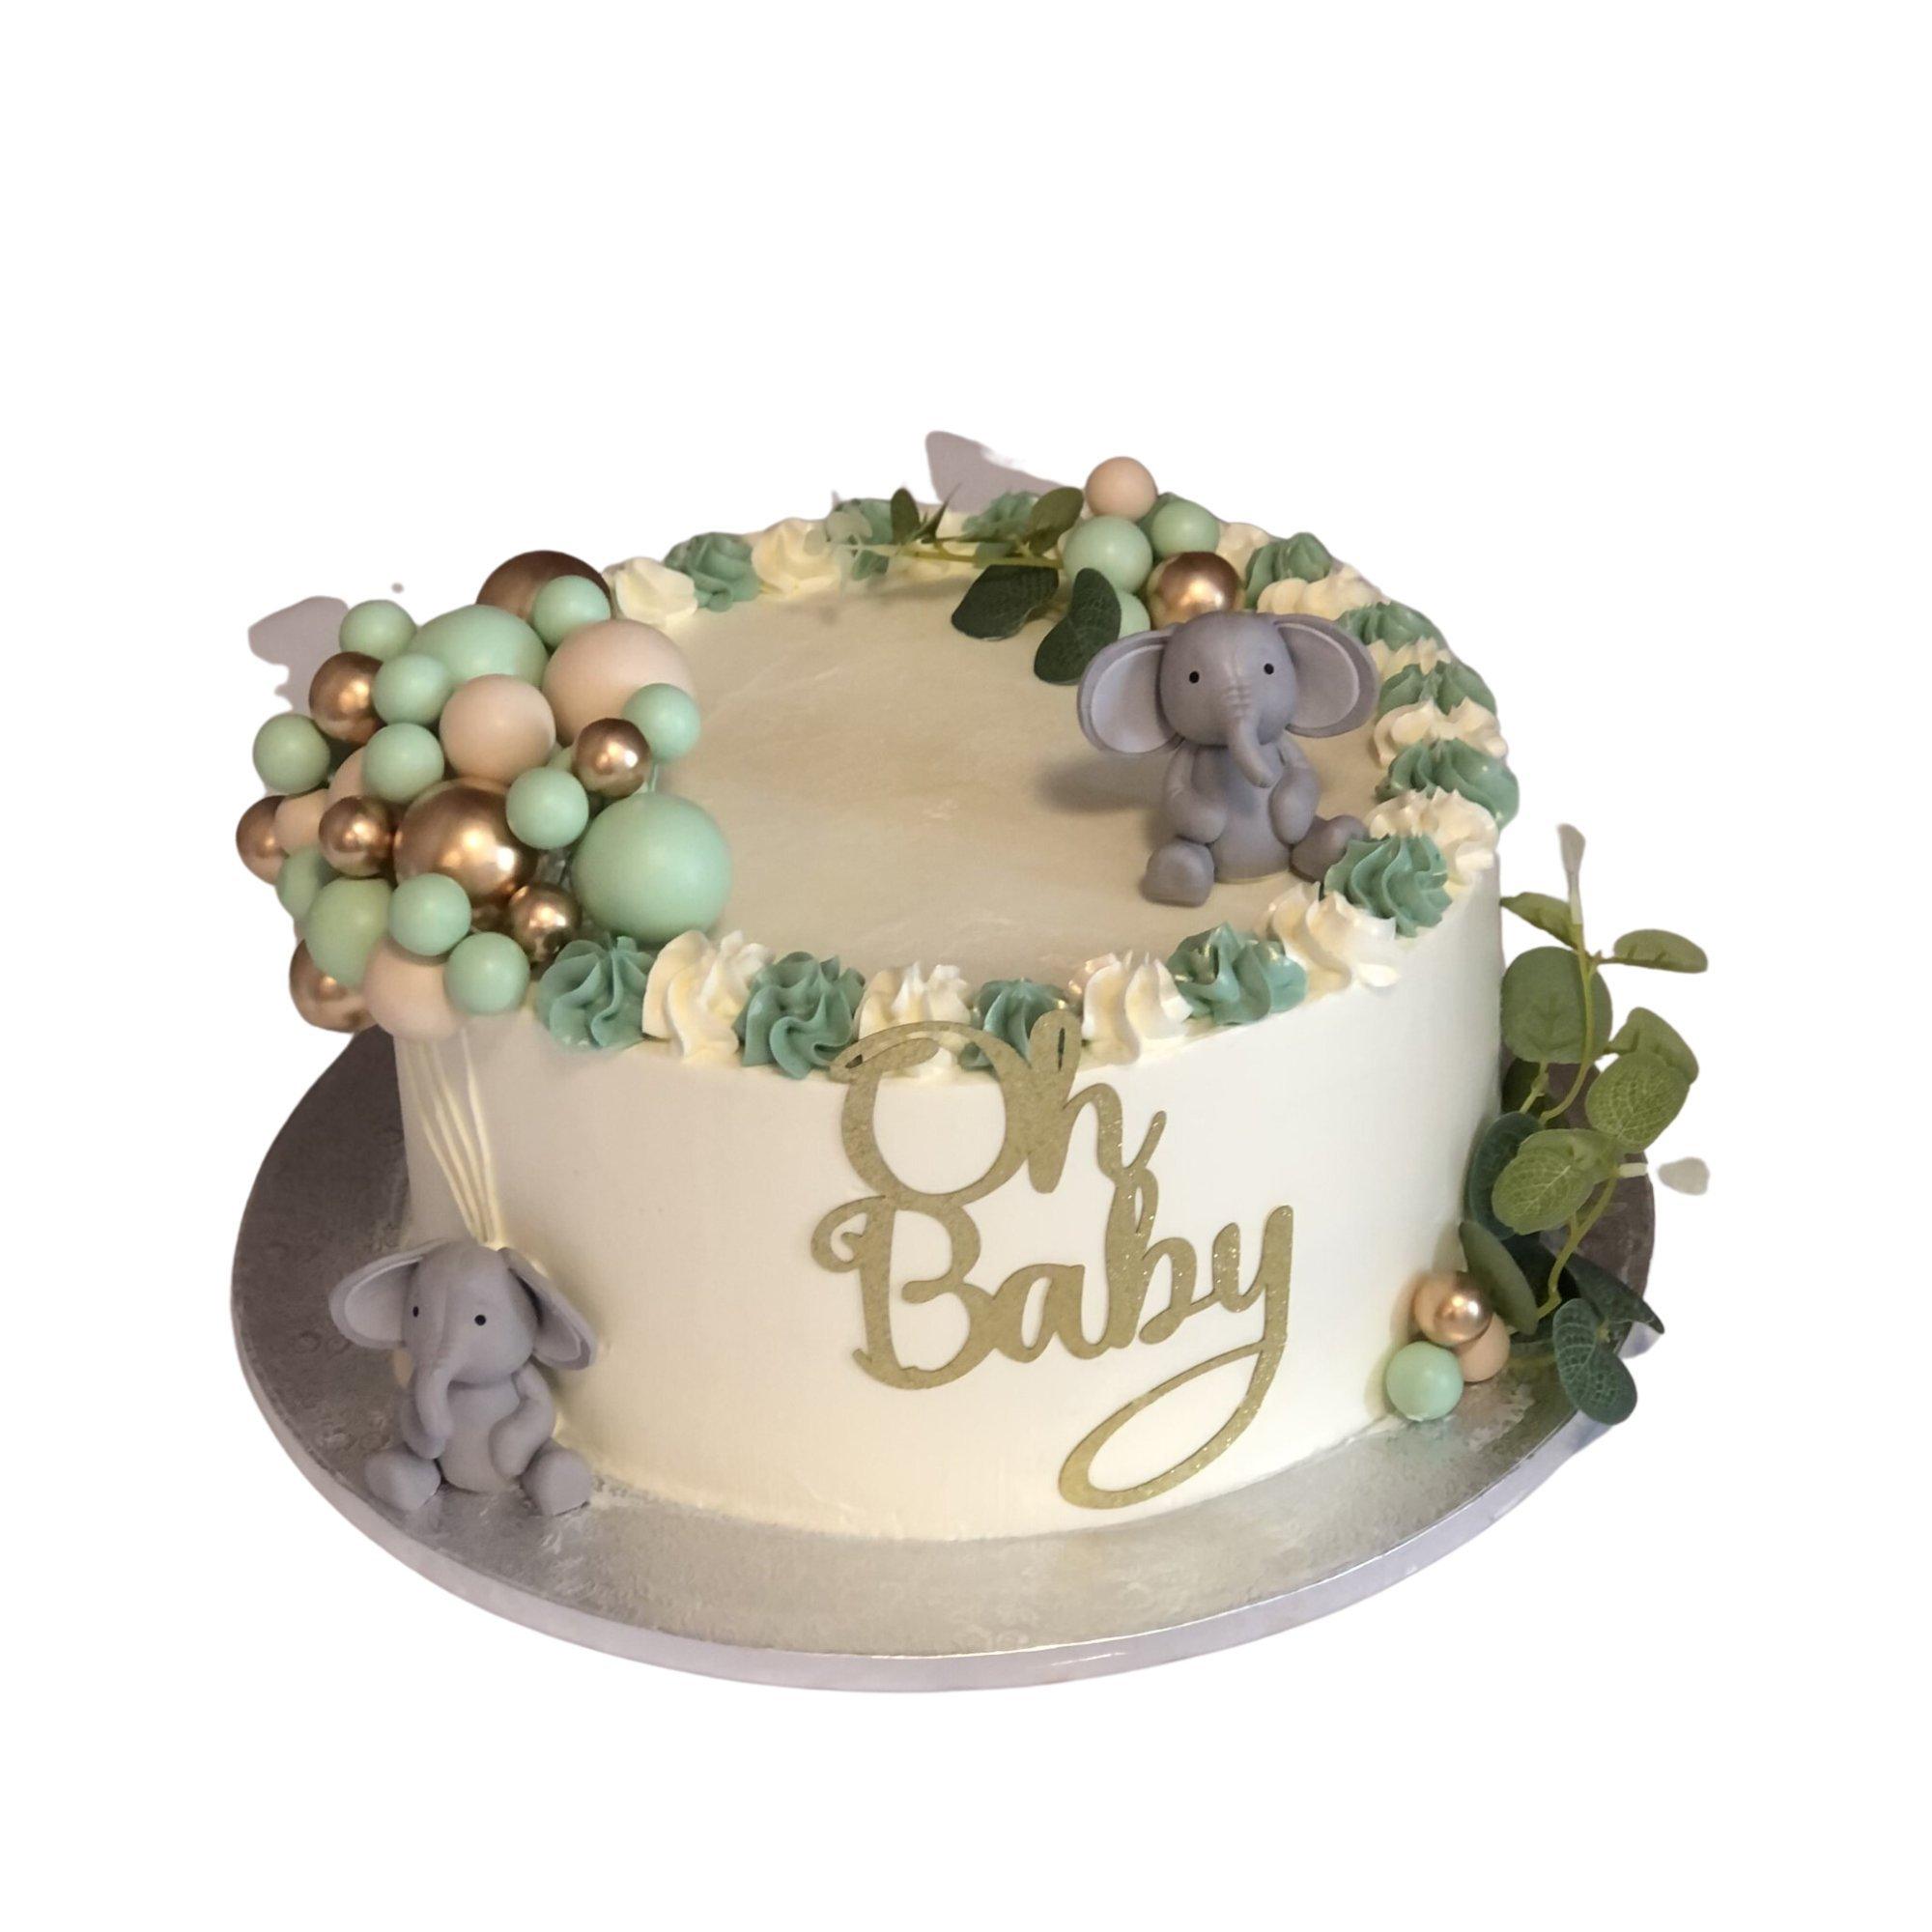 Patisserie Manon - Oh Baby Cake | Party City